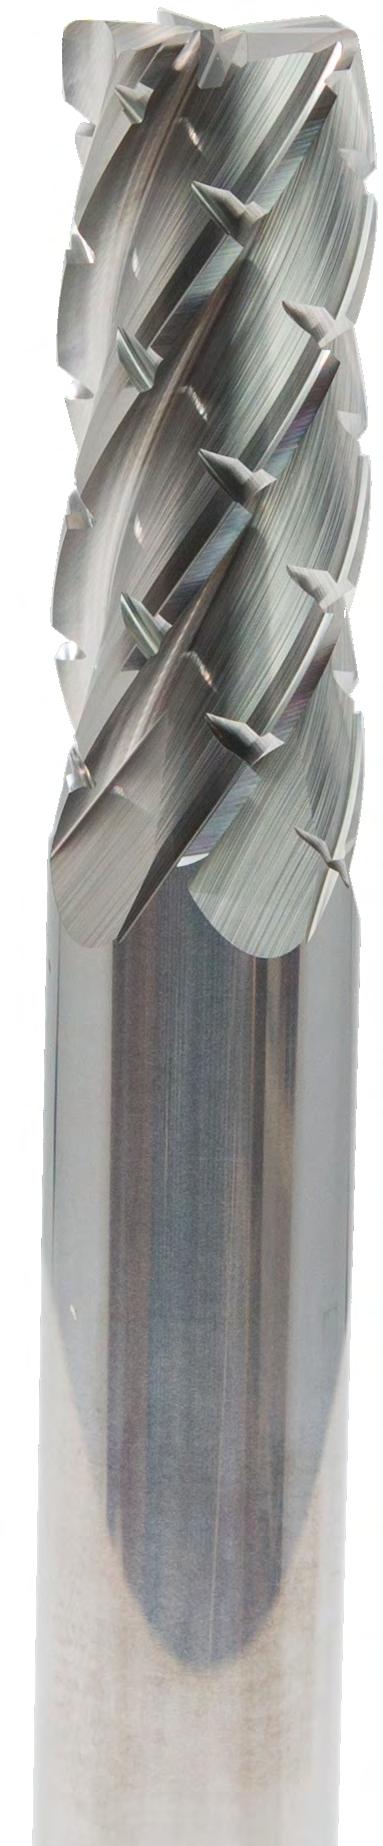 5500 Series MATRX EM-1 End Mill: Multi-flute design allows for ultimate material removal rates. High shear and low cutting forces provide a clean edge without fibers.